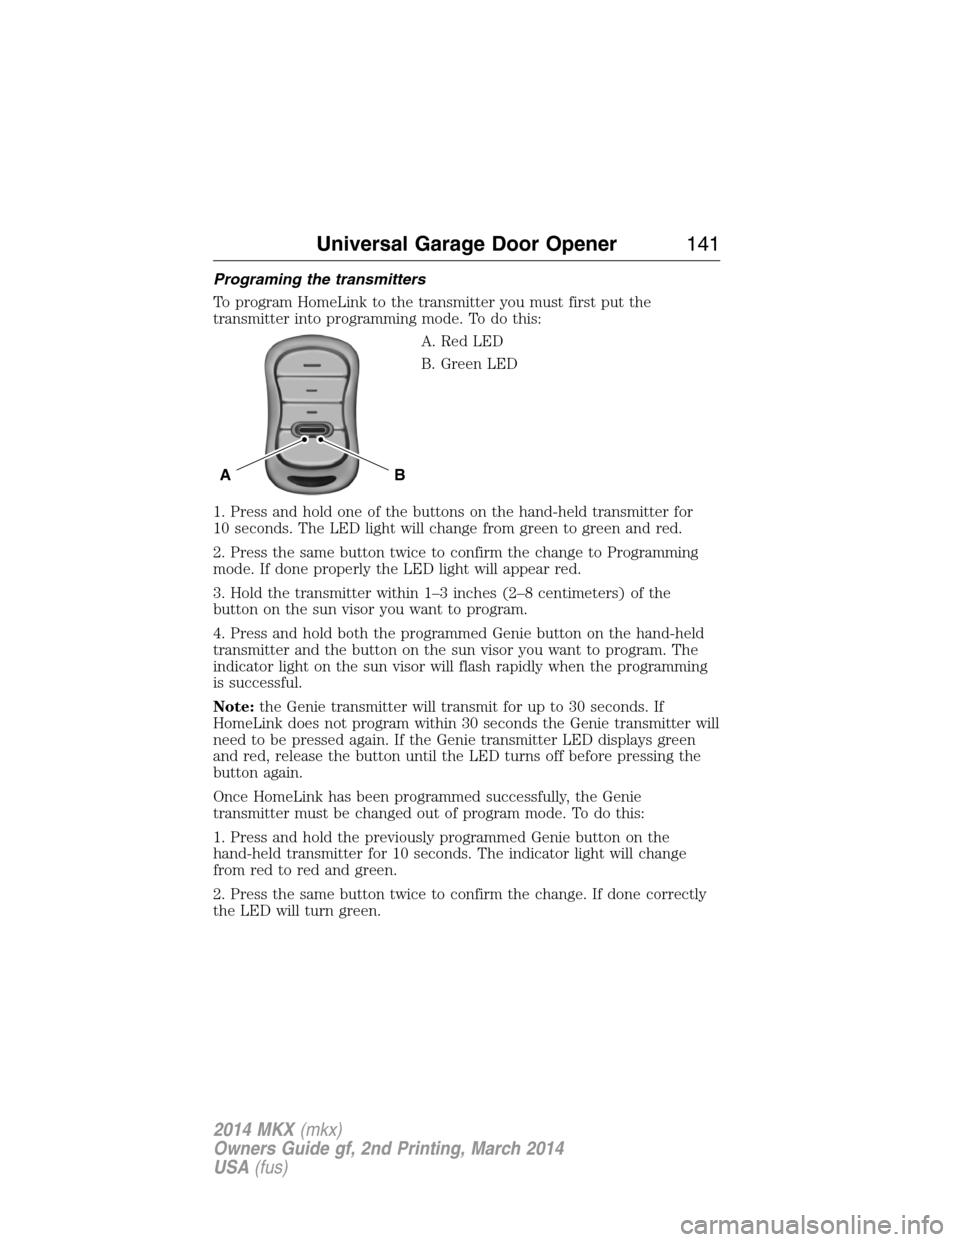 LINCOLN MKX 2014  Owners Manual Programing the transmitters
To program HomeLink to the transmitter you must first put the
transmitter into programming mode. To do this:
A. Red LED
B. Green LED
1. Press and hold one of the buttons on